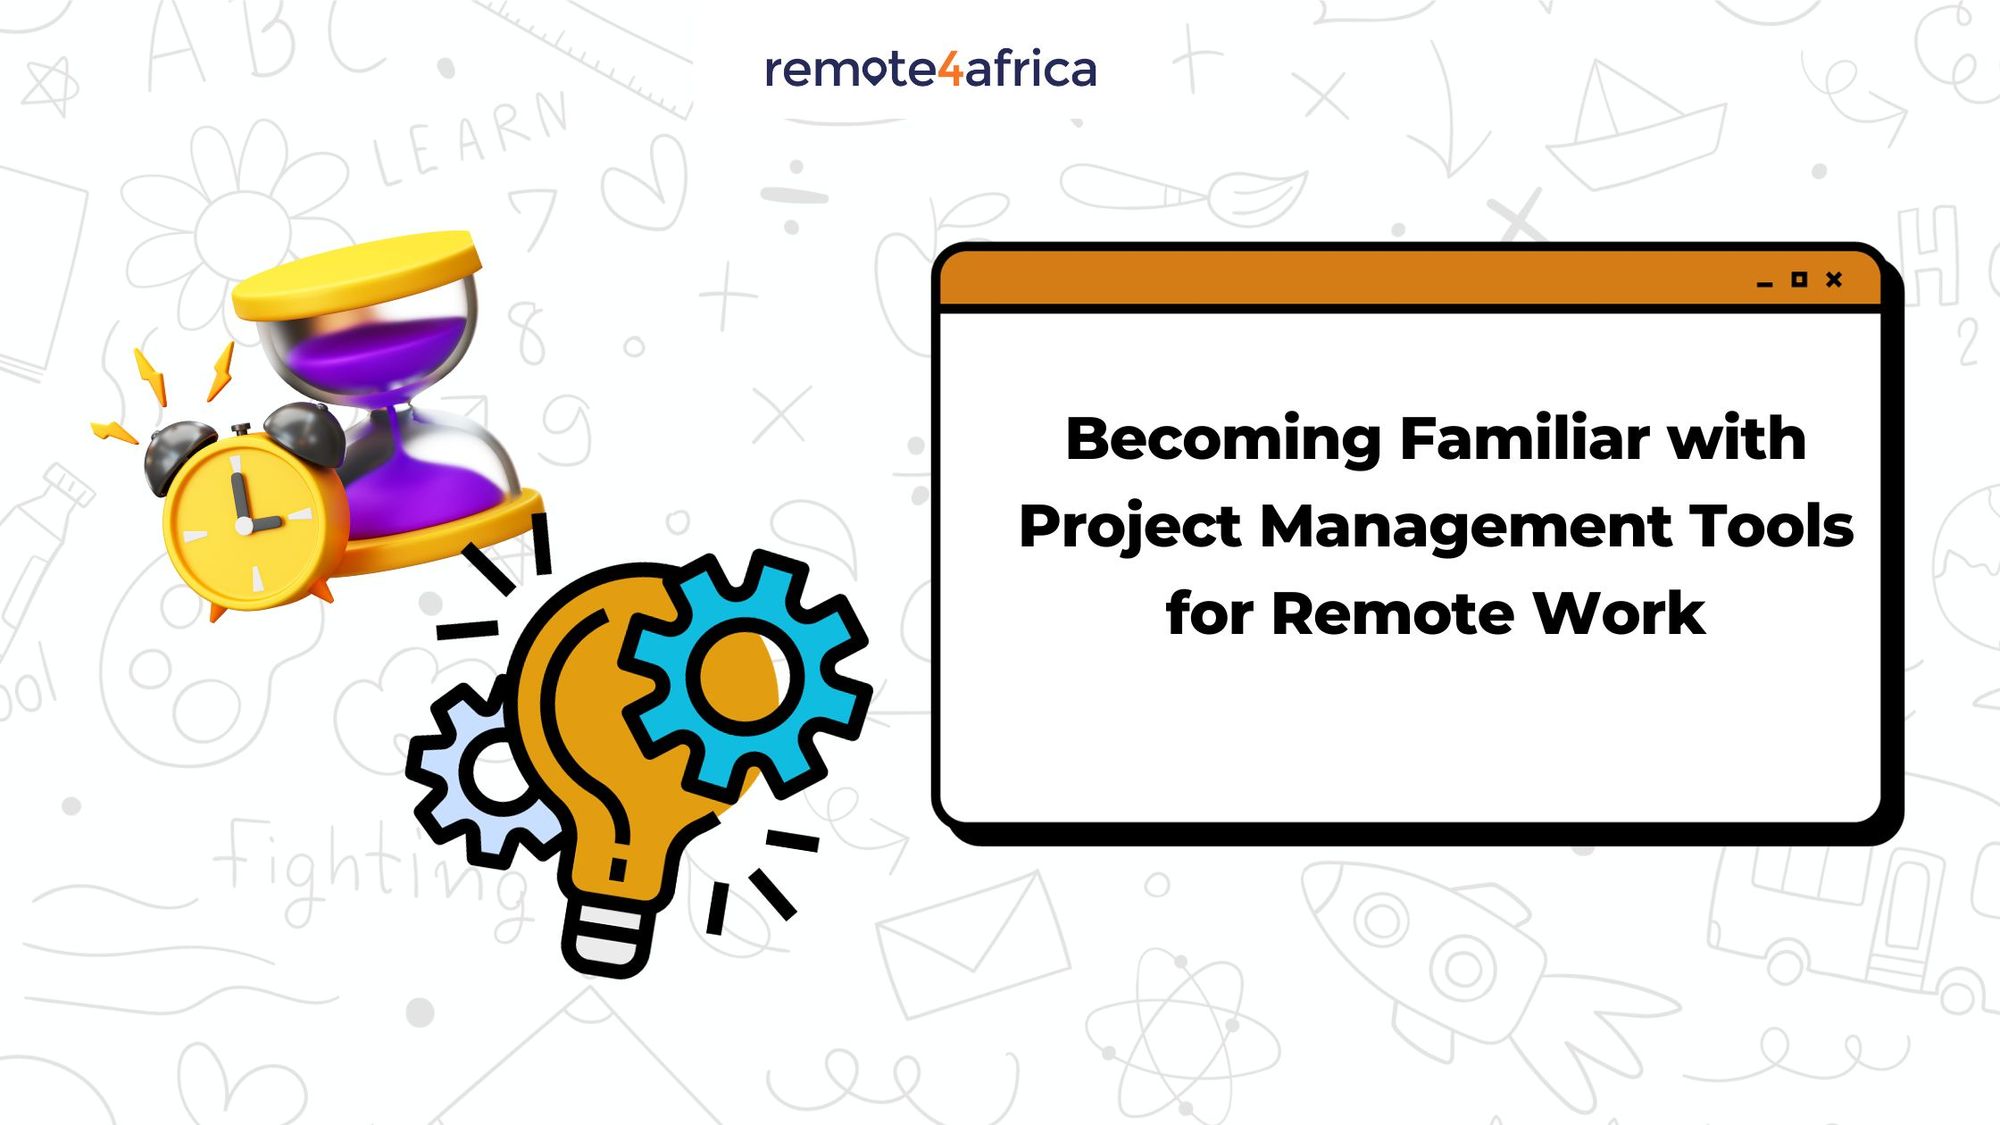 Becoming Familiar with Project Management Tools for Remote Work